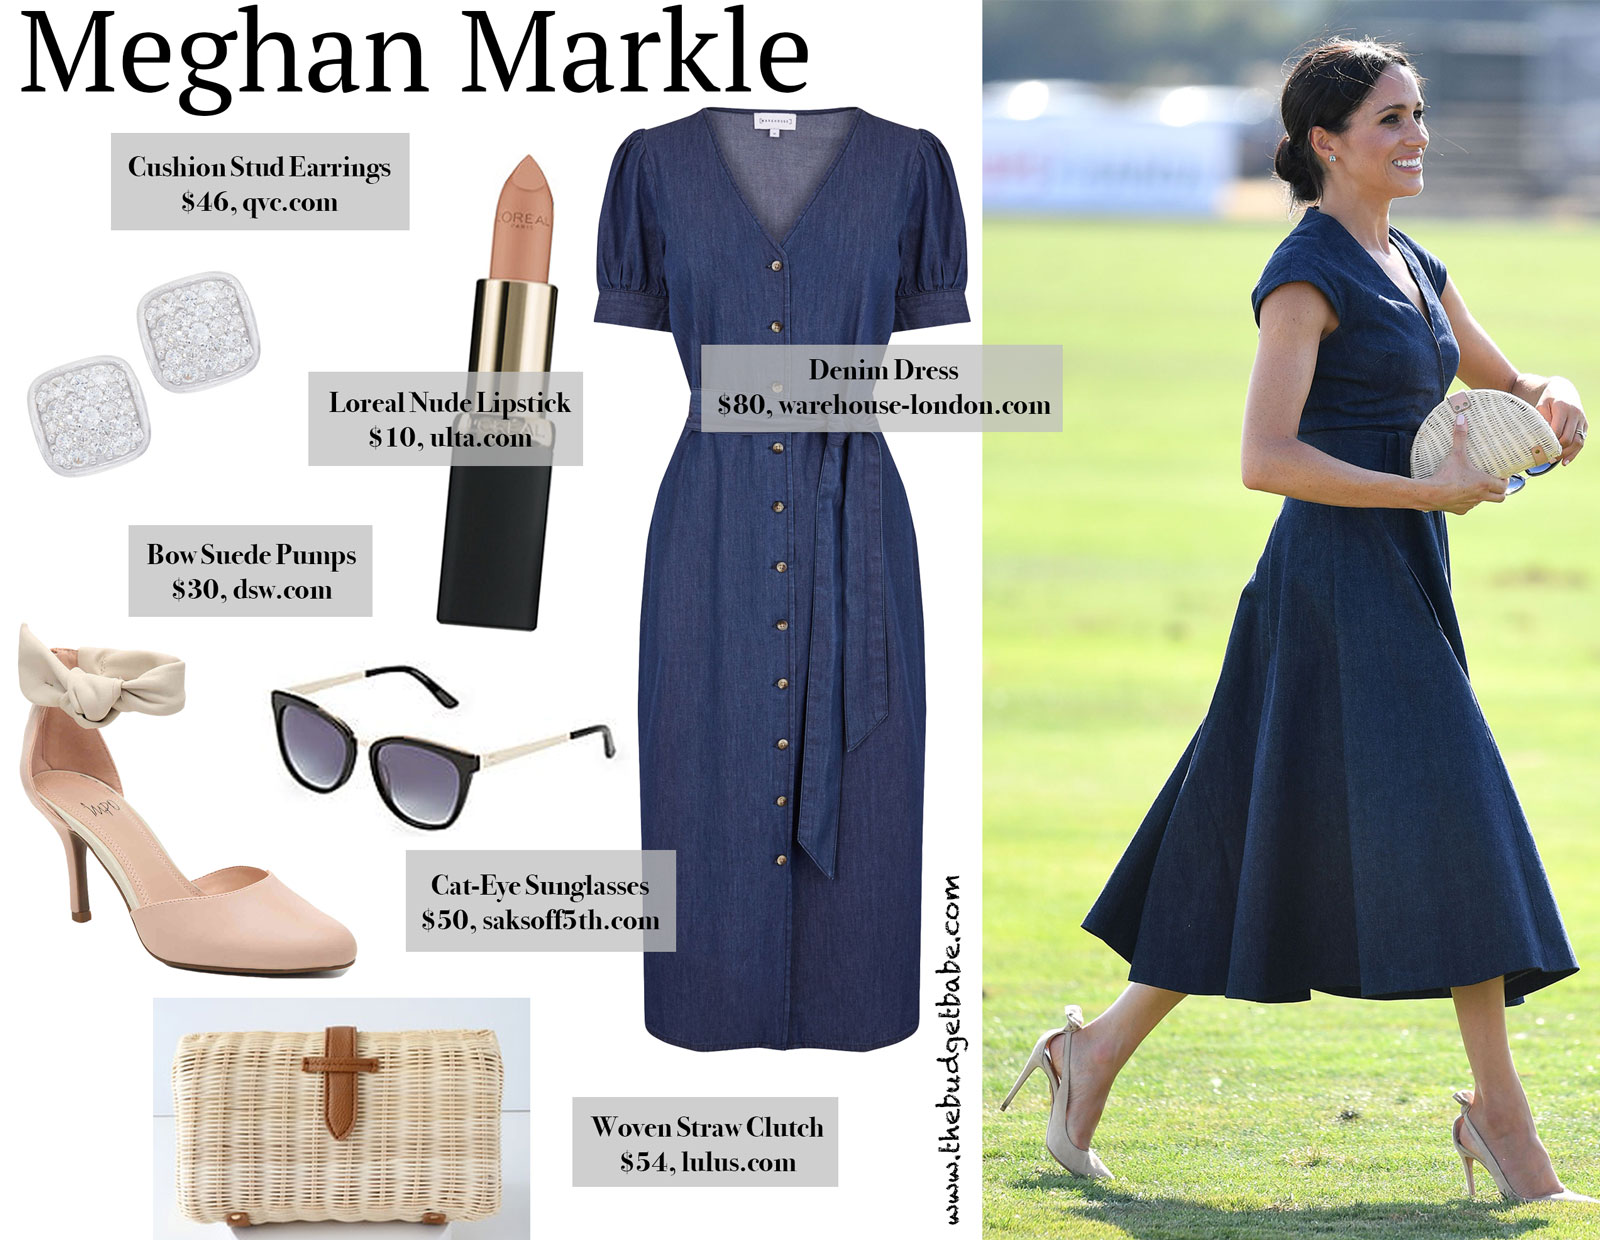 Meghan Markle's Denim Dress and Bow Suede Heels Look for Less